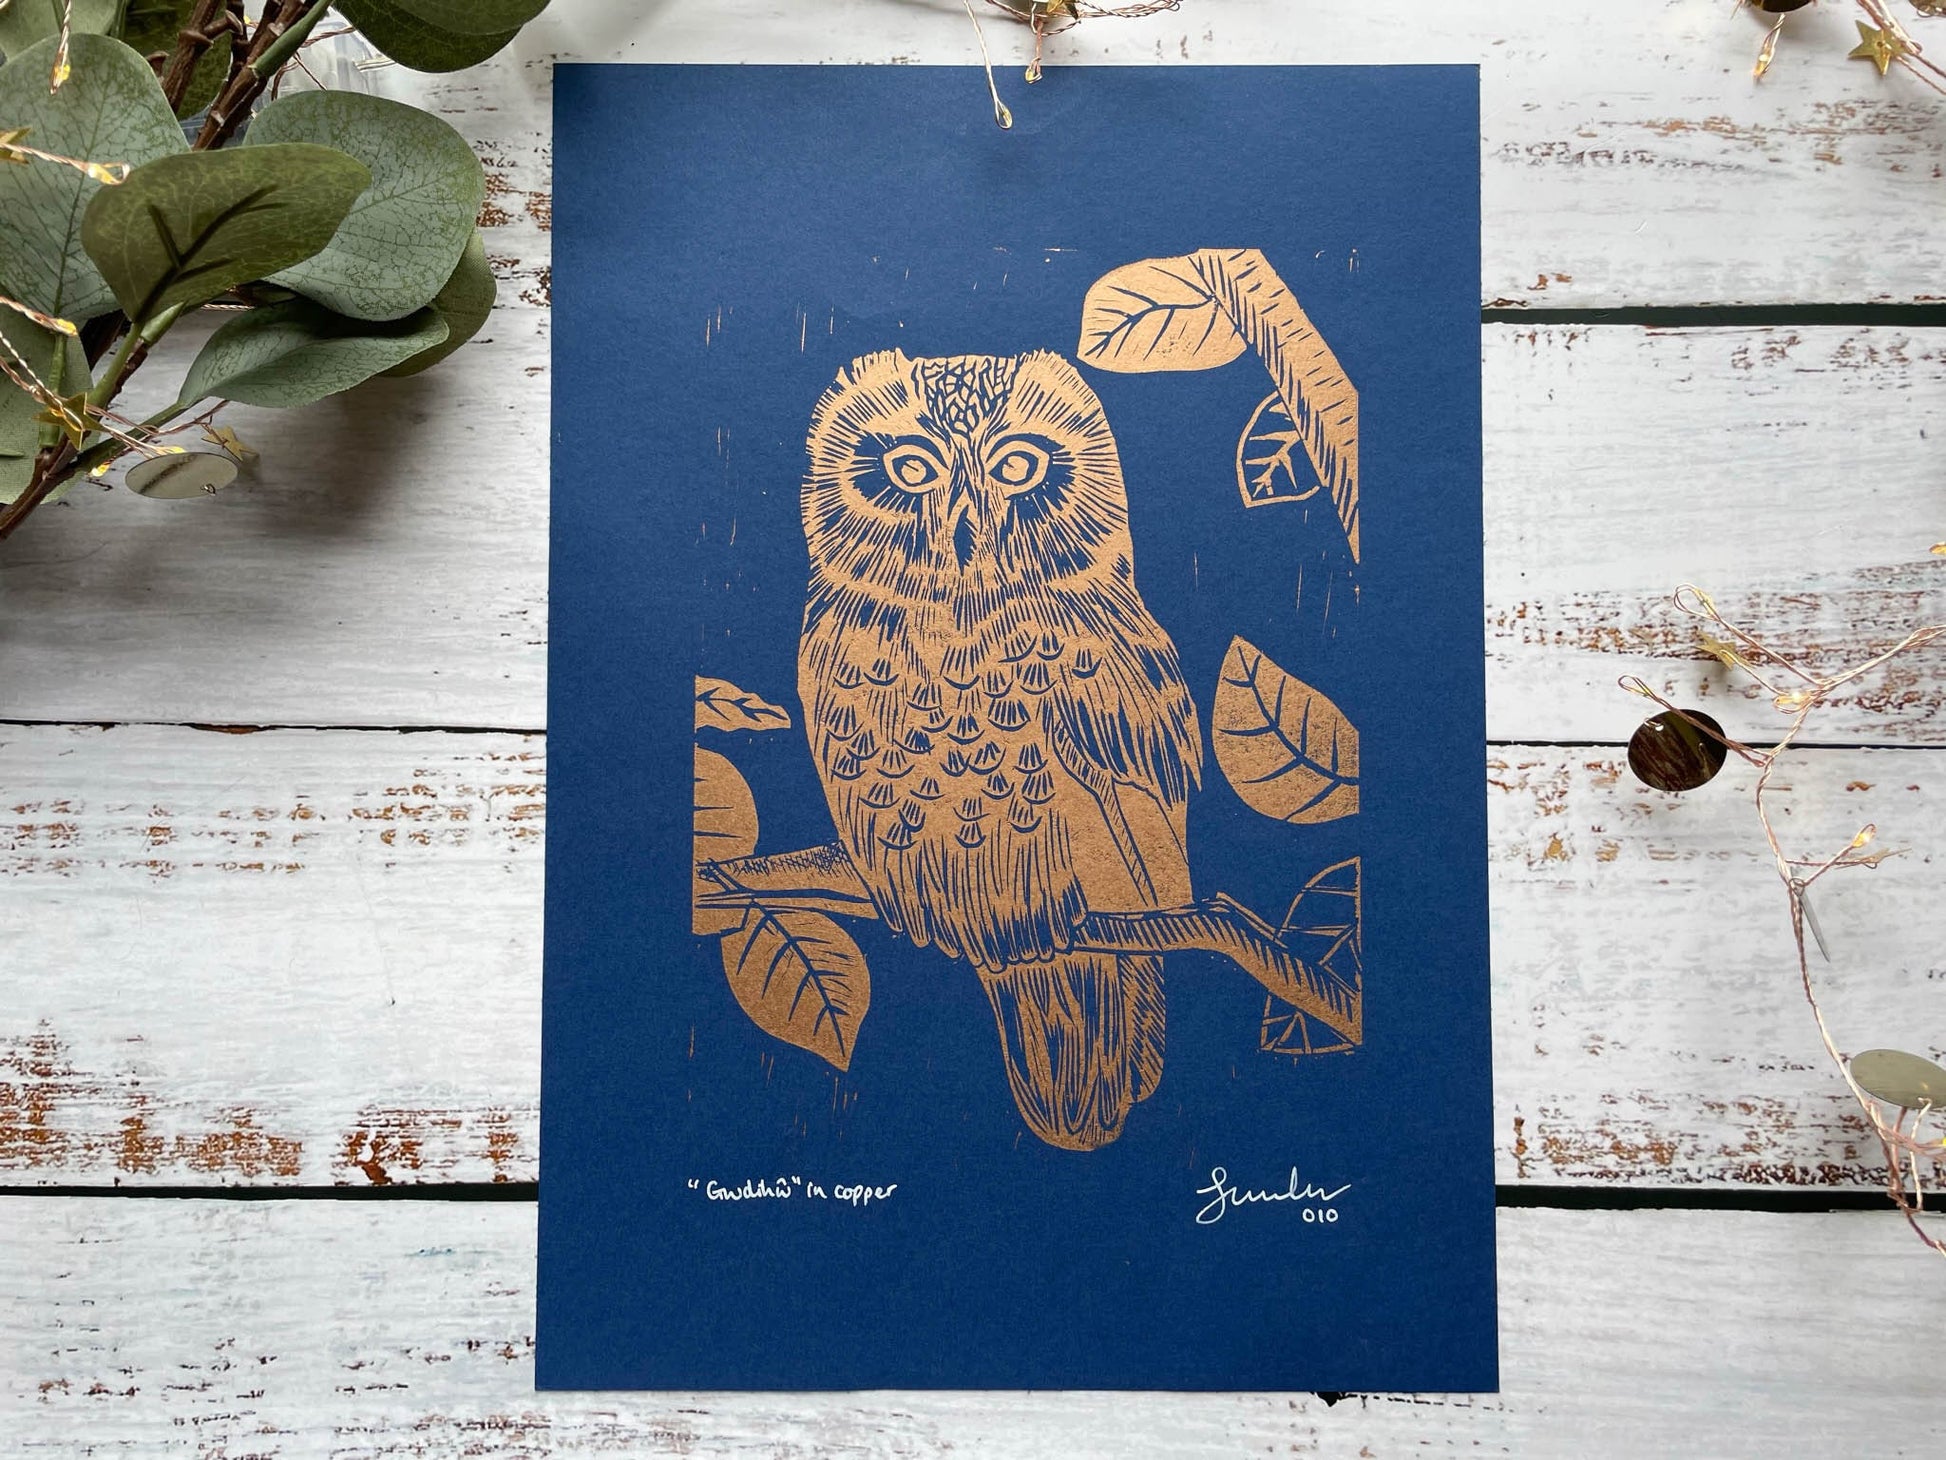 A lino print of an owl sitting in a tree in copper on blue paper